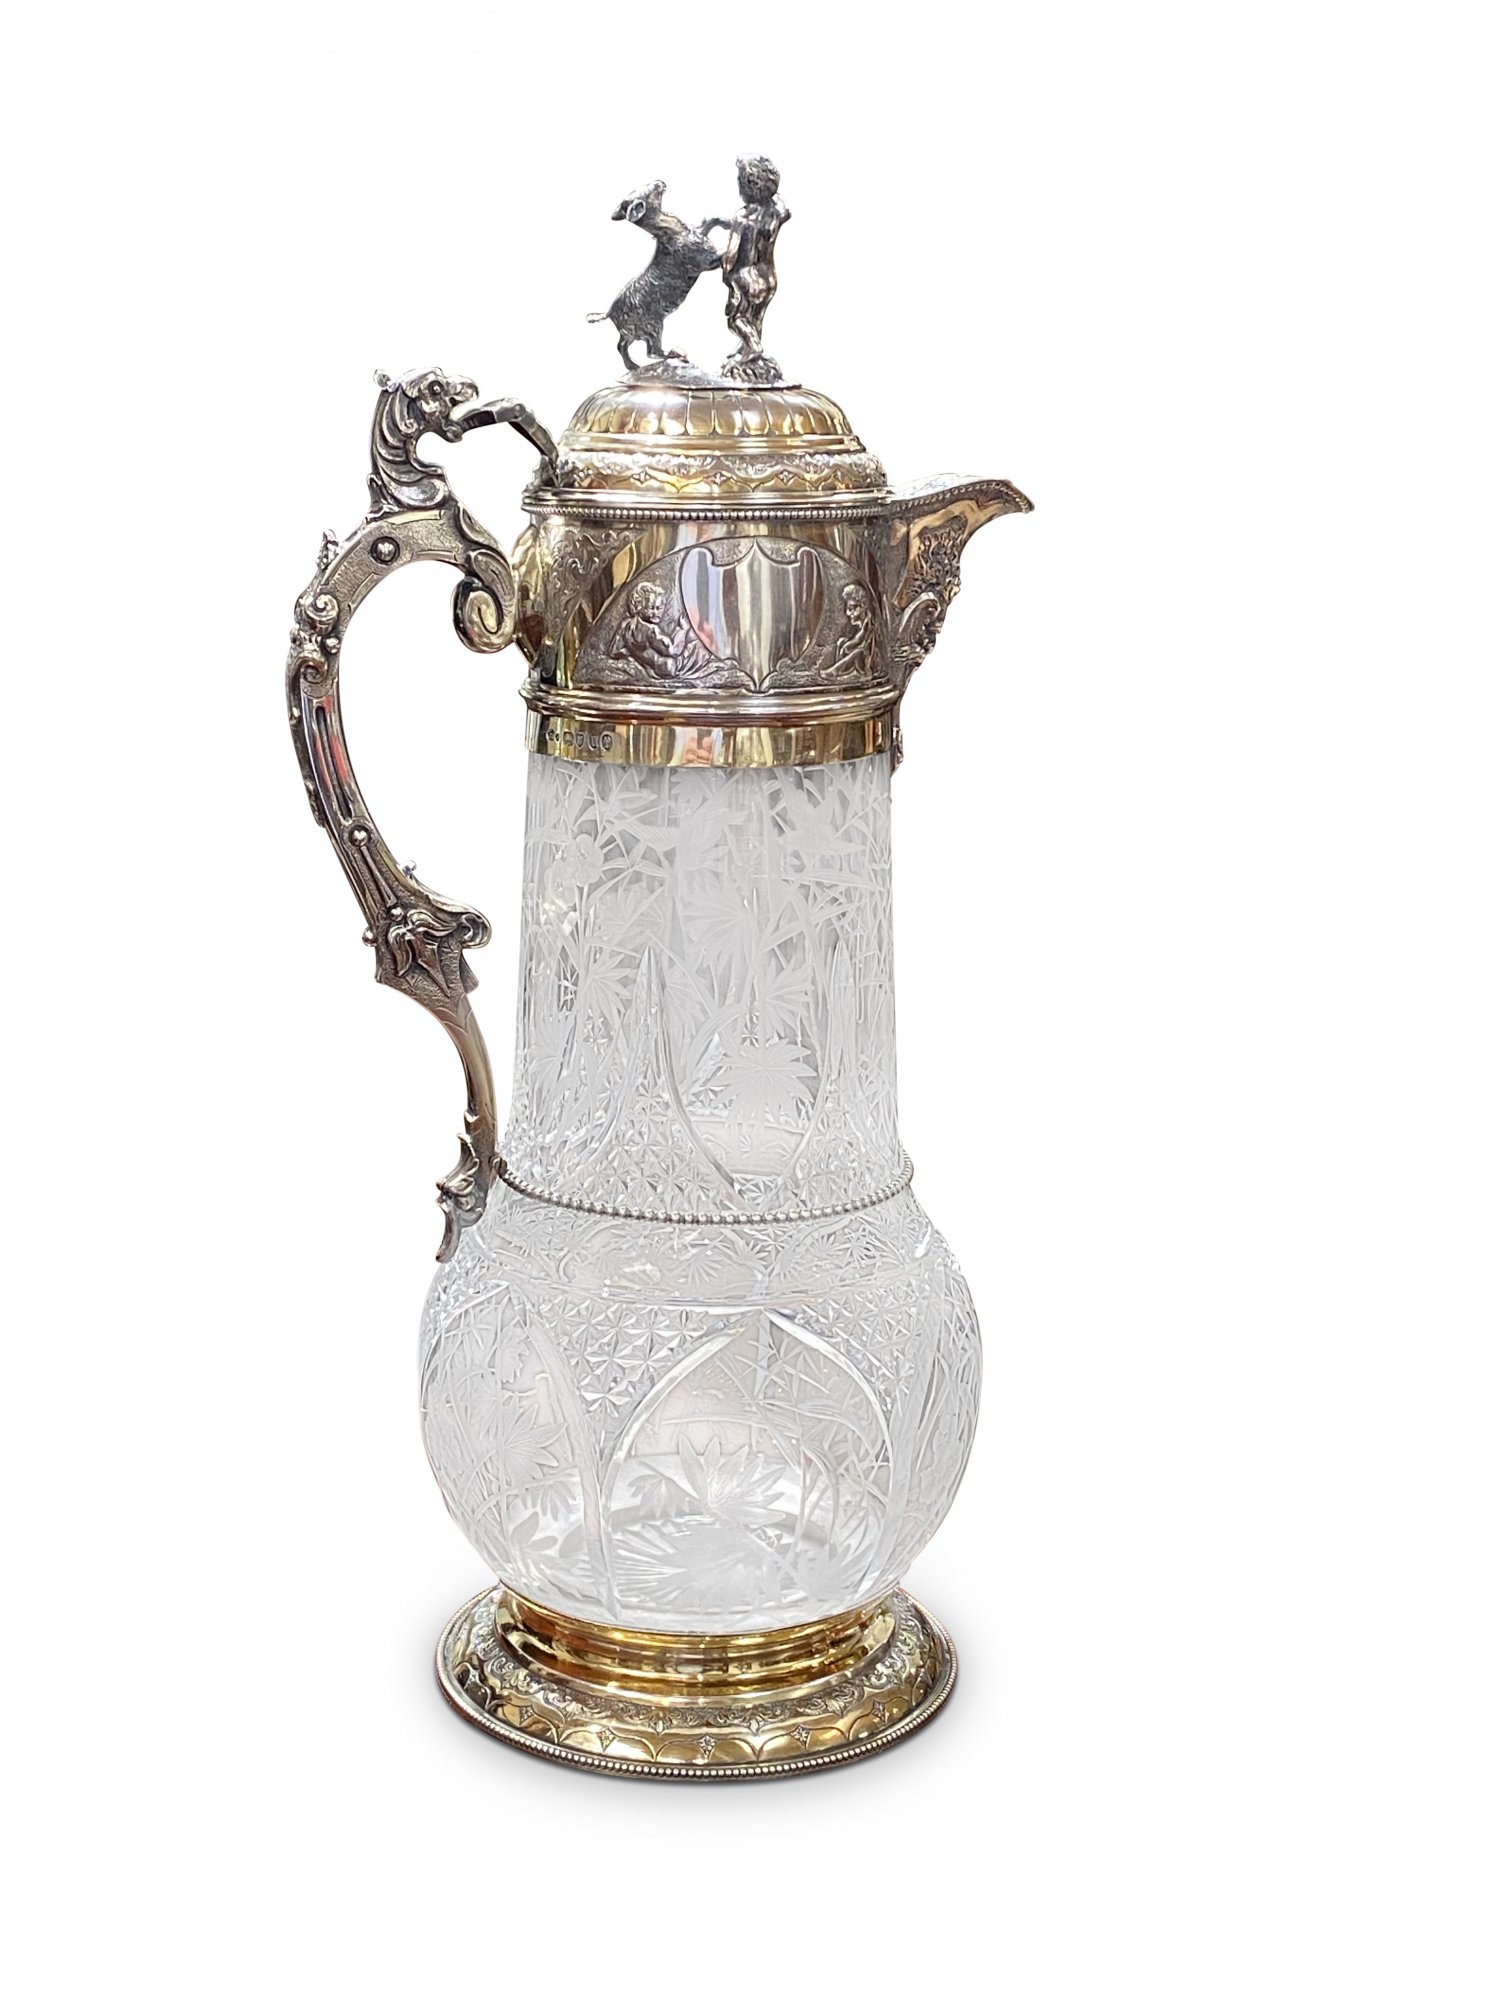 Superb 19th Sterling Silver and Gilt Ewer with exquisite hand cut crystal by Charles Edwards London